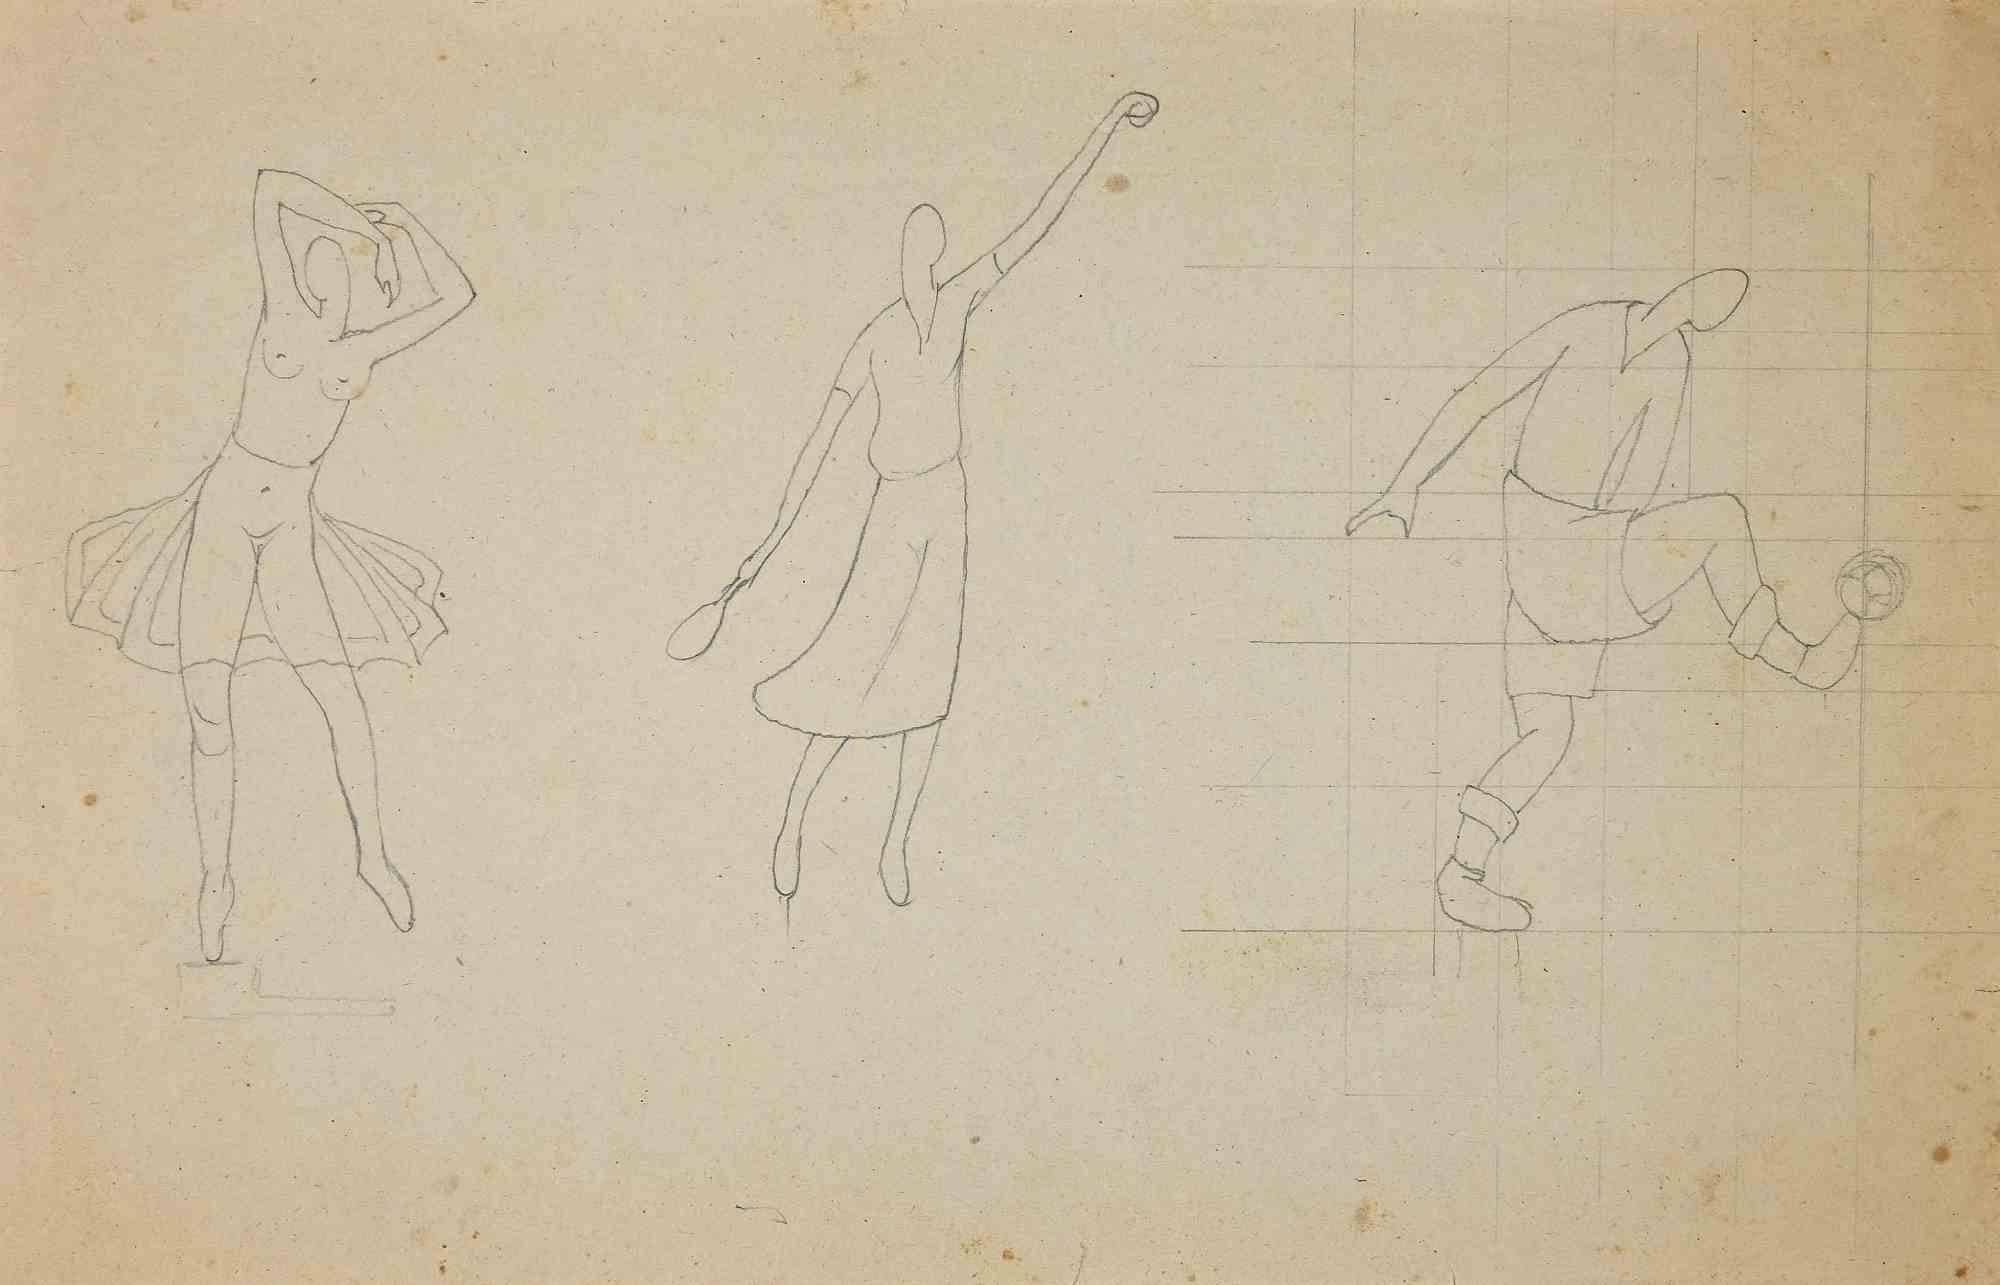 Unknown Figurative Art - The Study of Sportive Figures - Drawing - 1910s